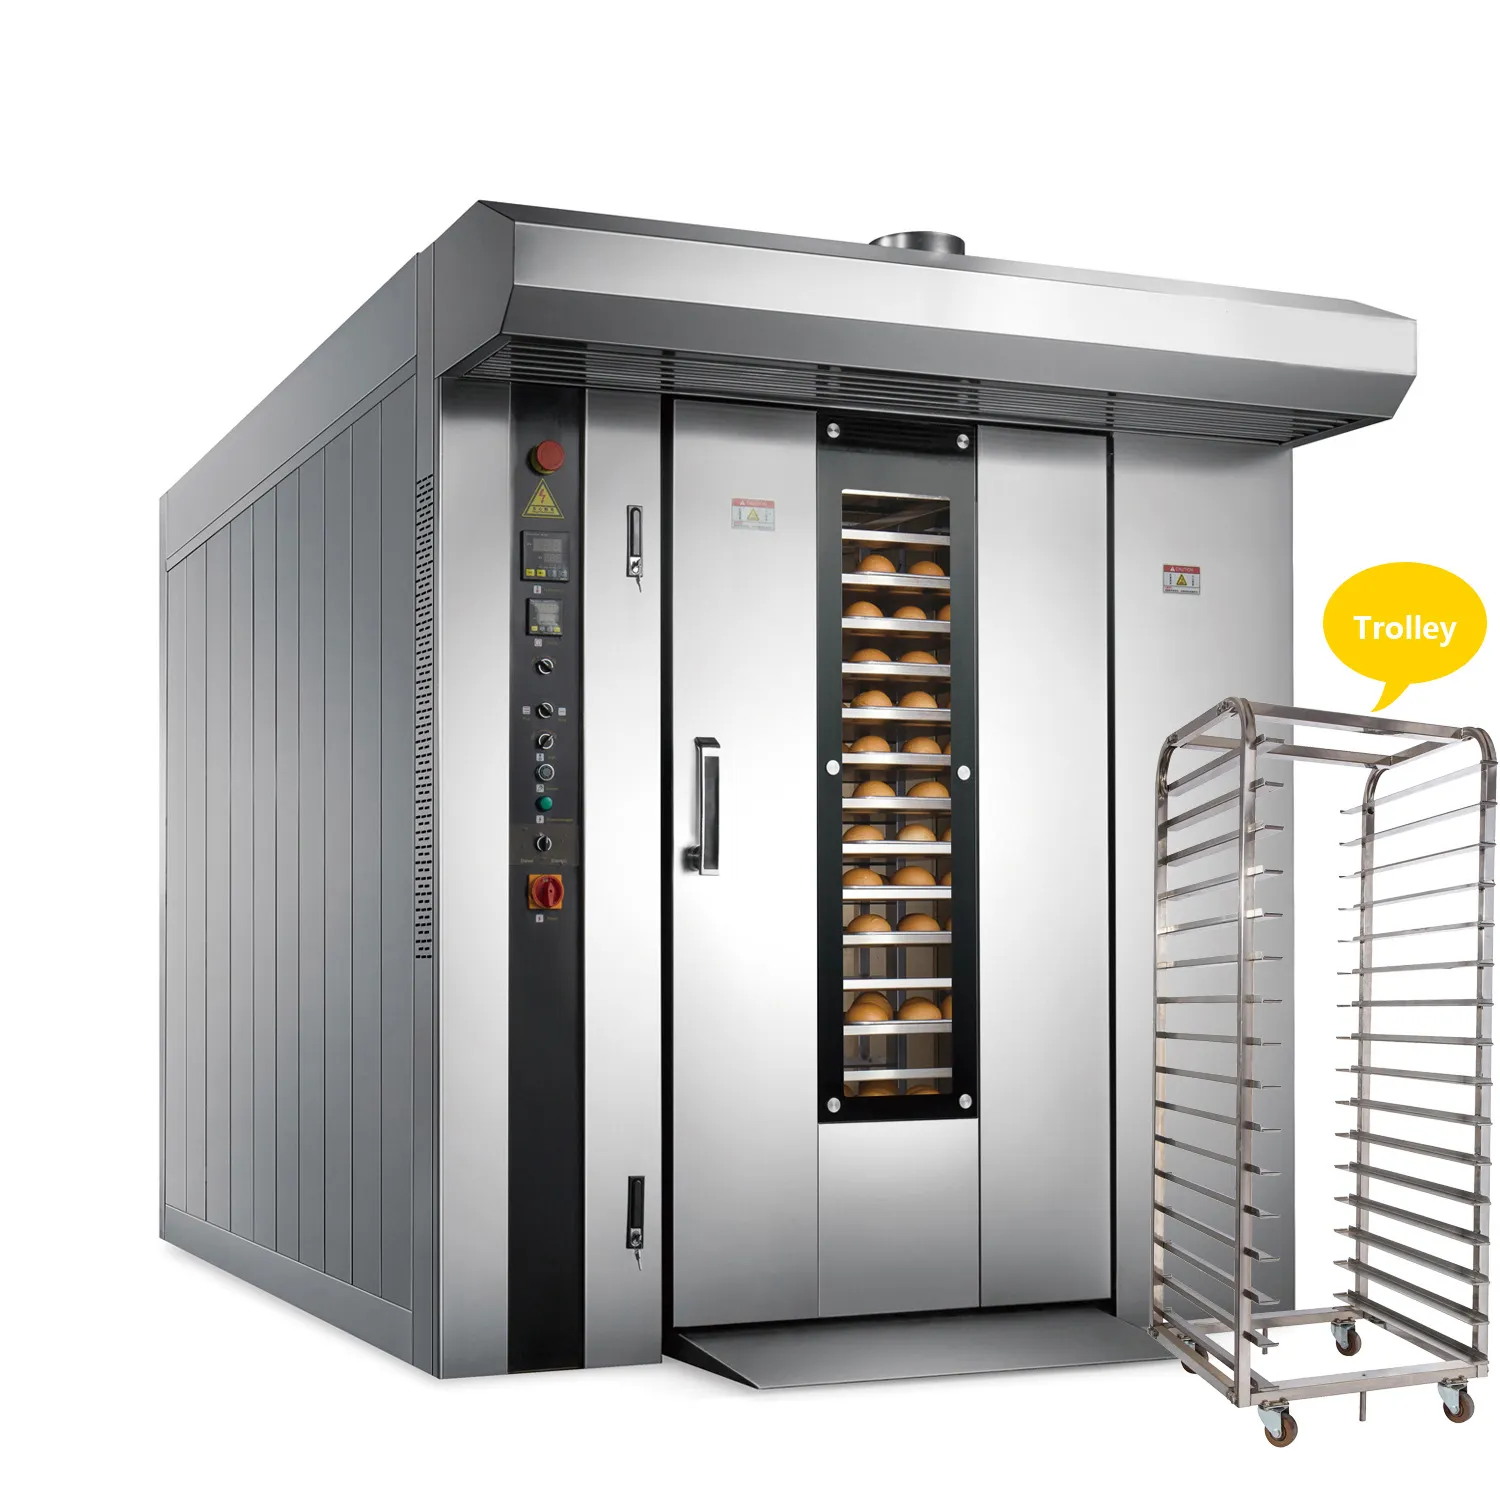 Commercial Bakery Equipment Convection 16/32 Trays Pizza Bread Baking Hot Air Rotary Ovens for Maker Machine